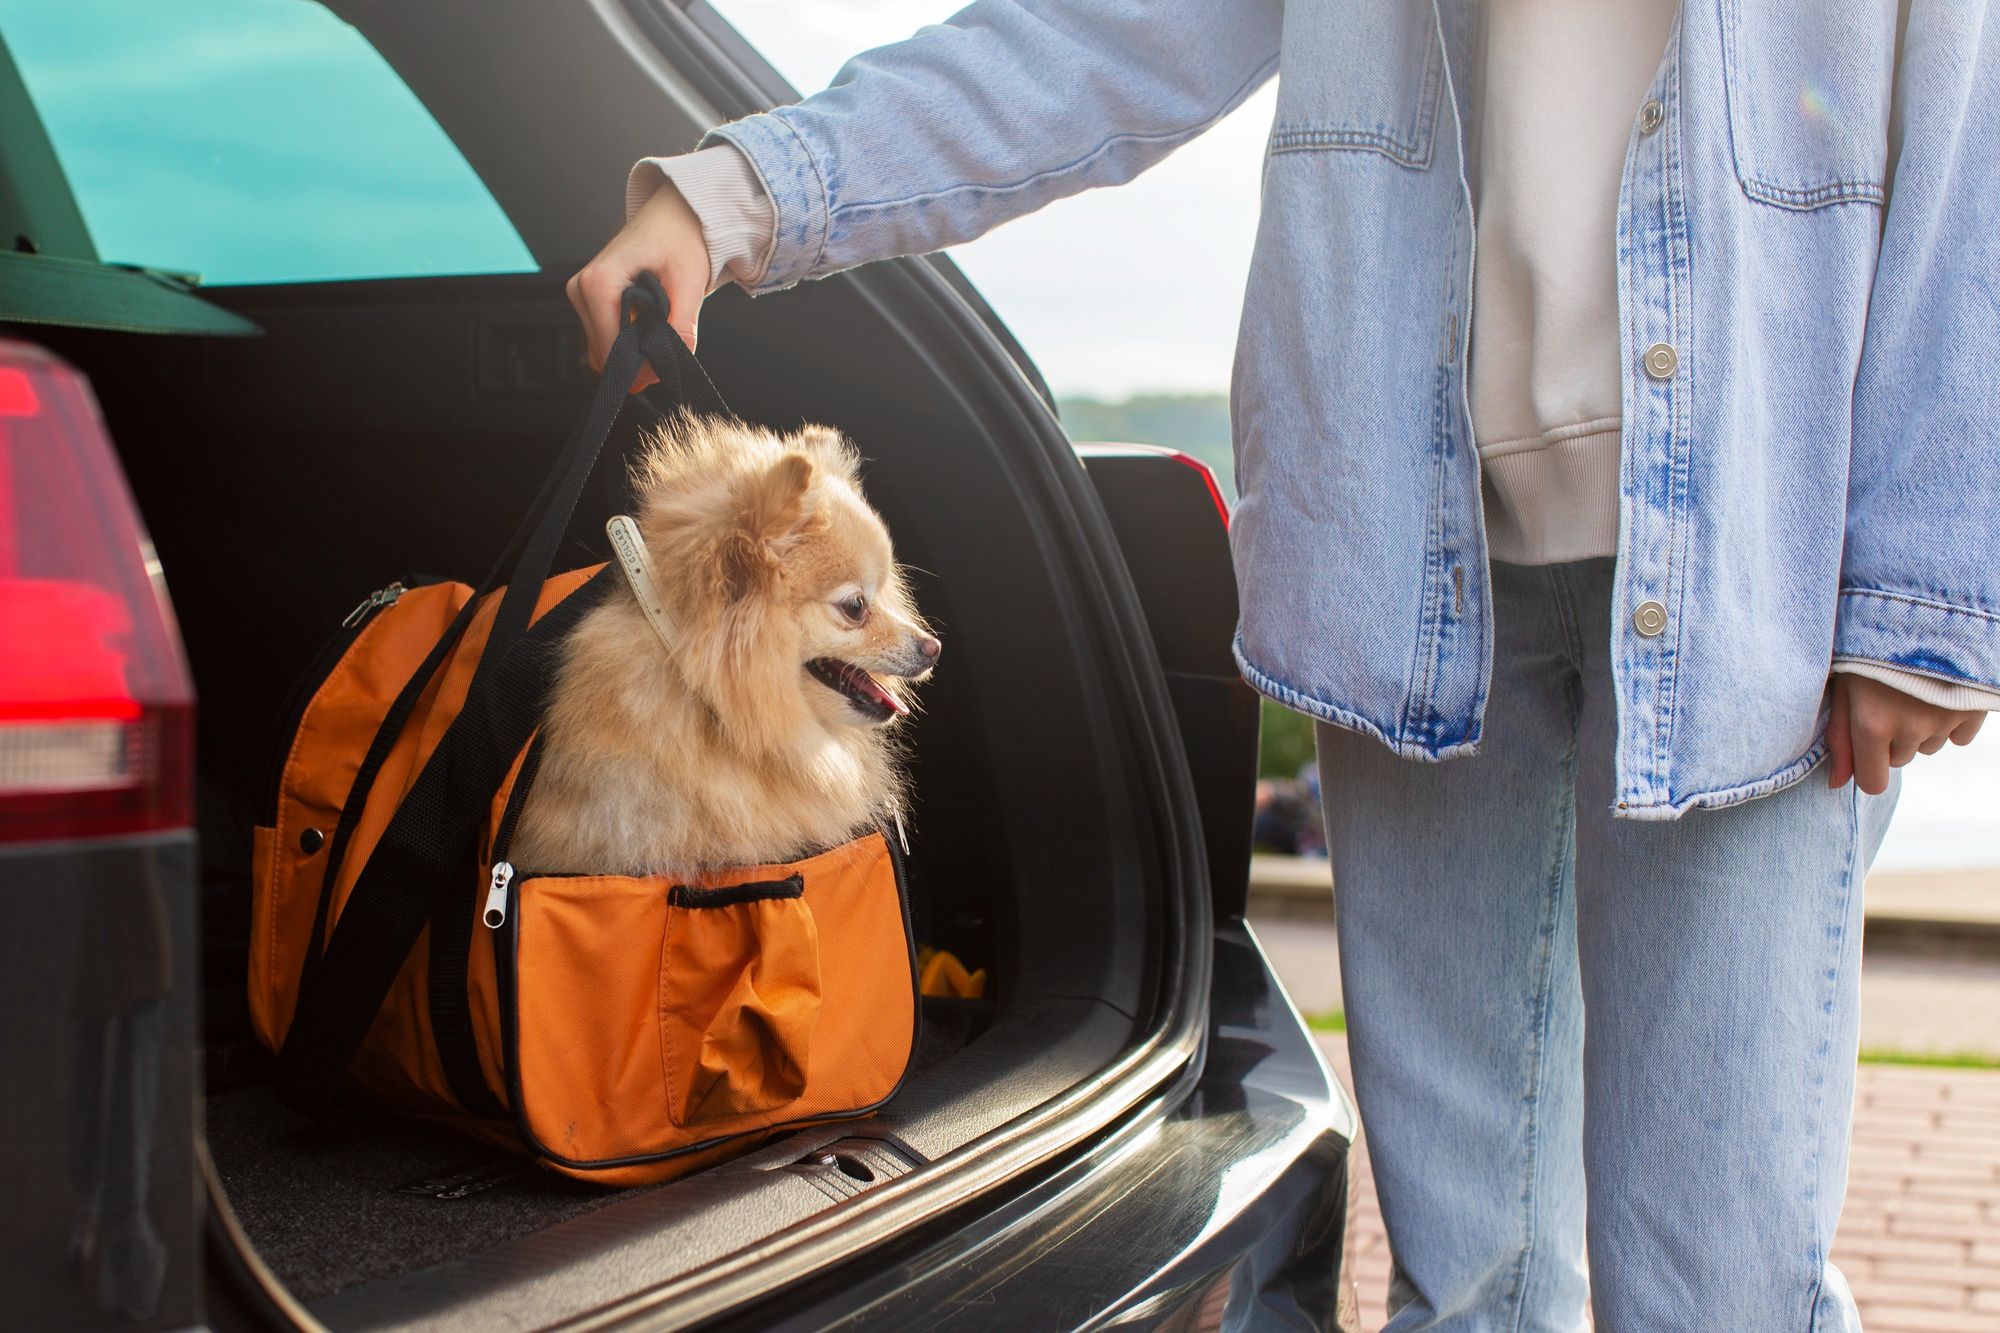 Traveling with Pets: What Hotels Allow Dogs?